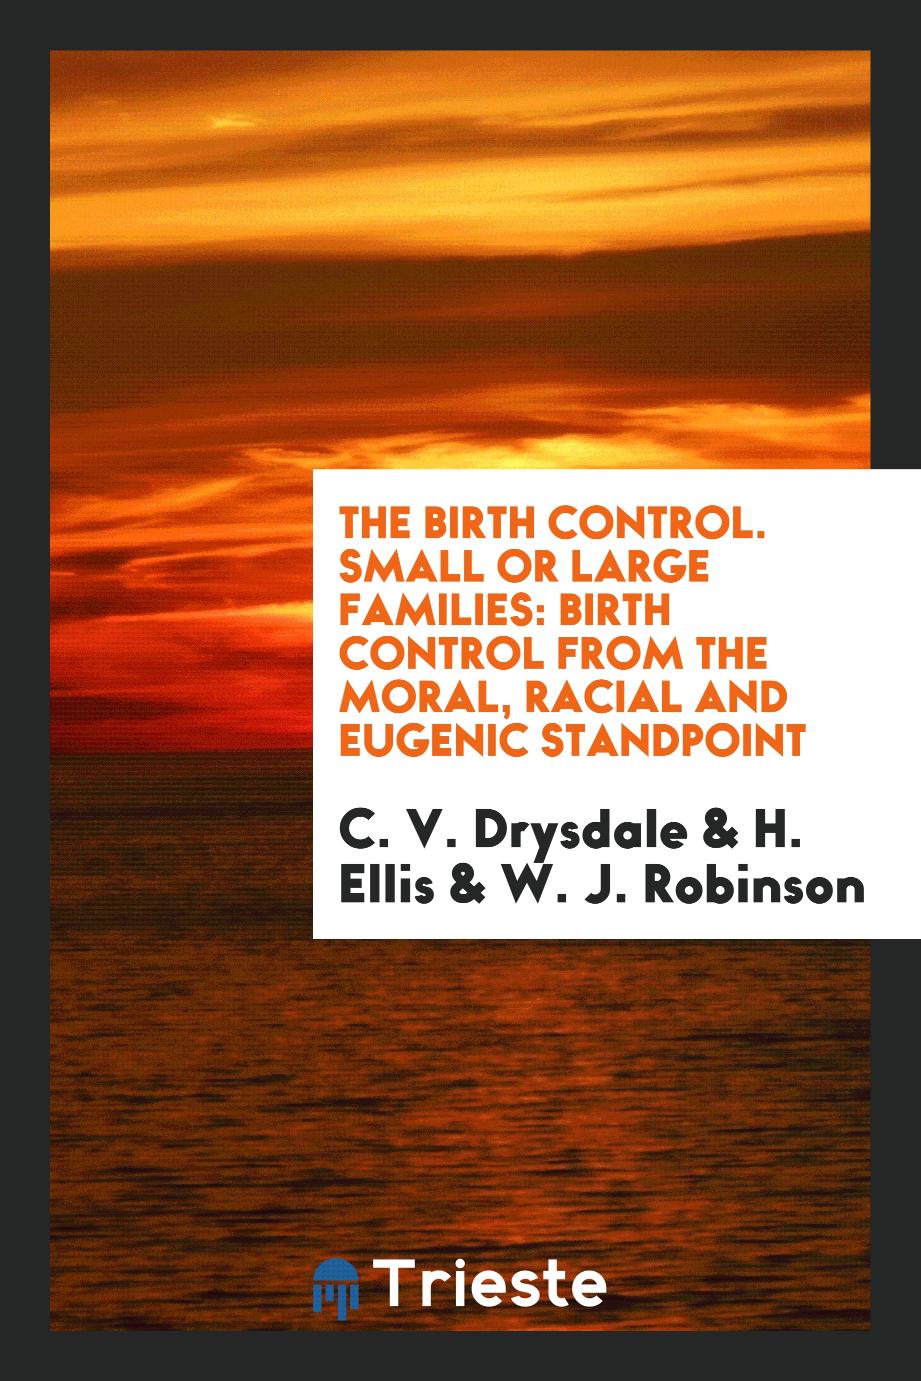 The Birth Control. Small or Large Families: Birth Control from the Moral, Racial and Eugenic Standpoint